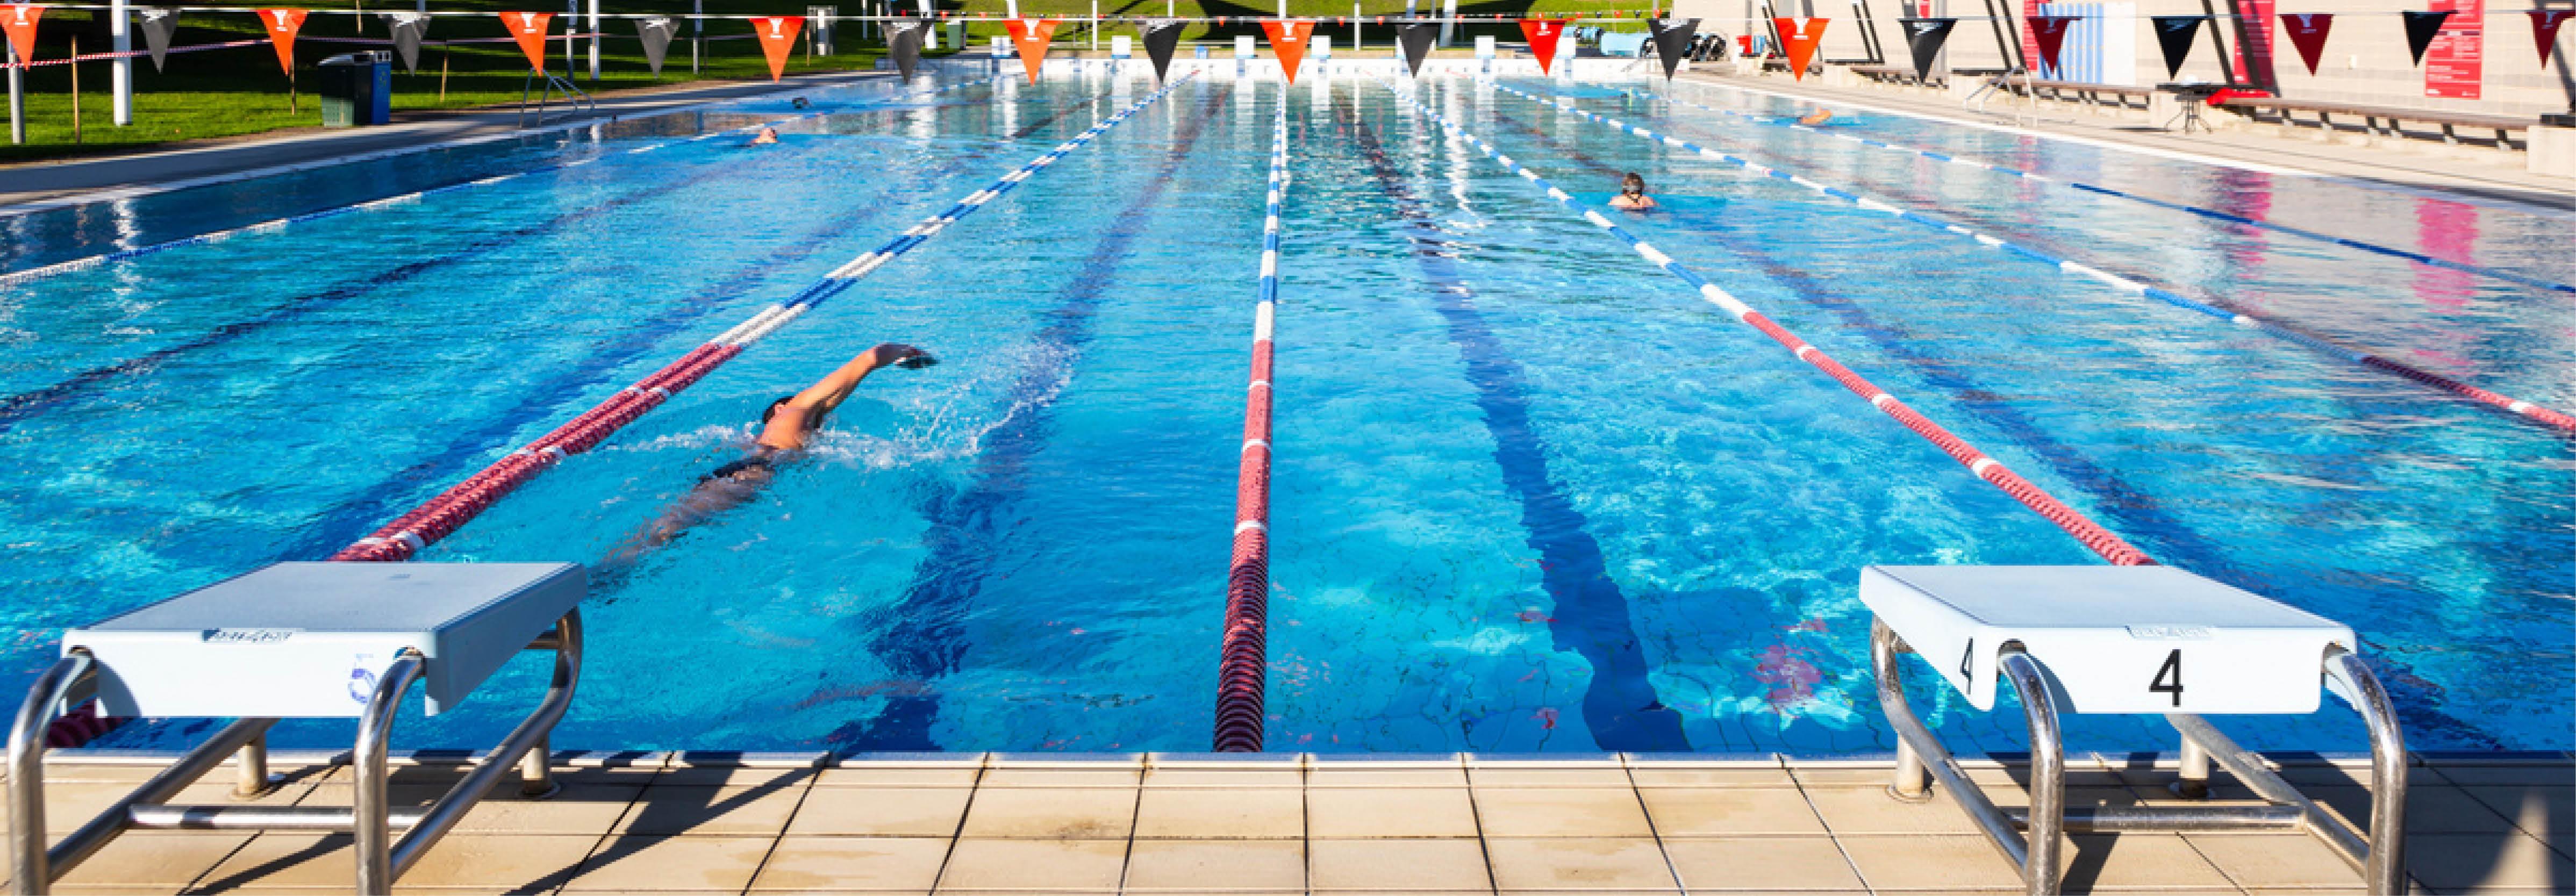 People swim laps in an outdoor pool